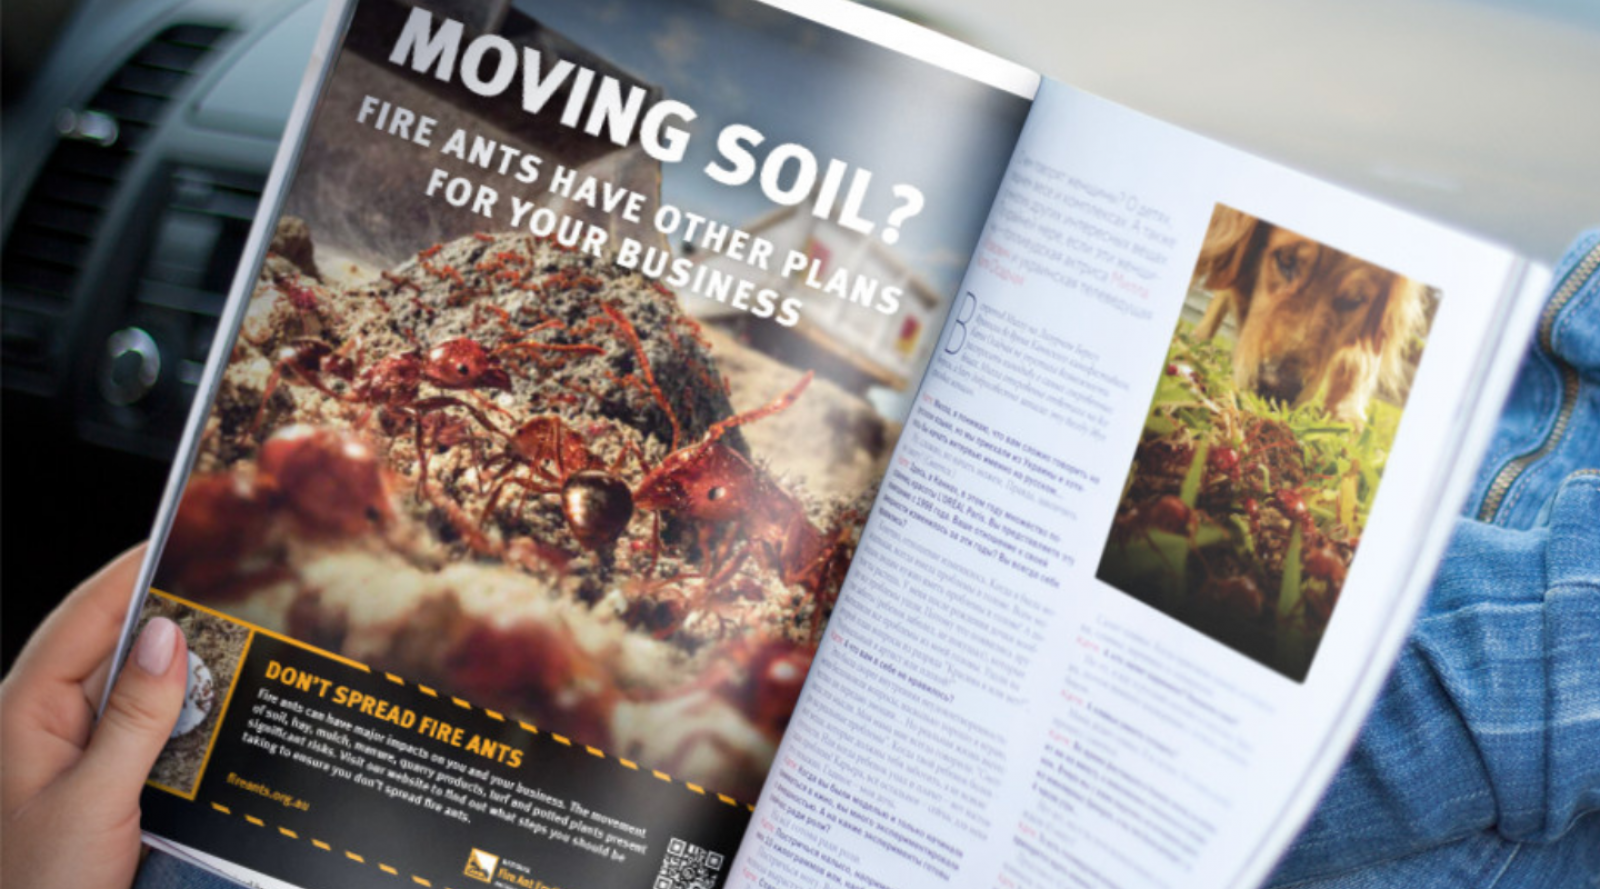 Moving soil advert in magazine, fire ants crawling in soil on construction site. banner image